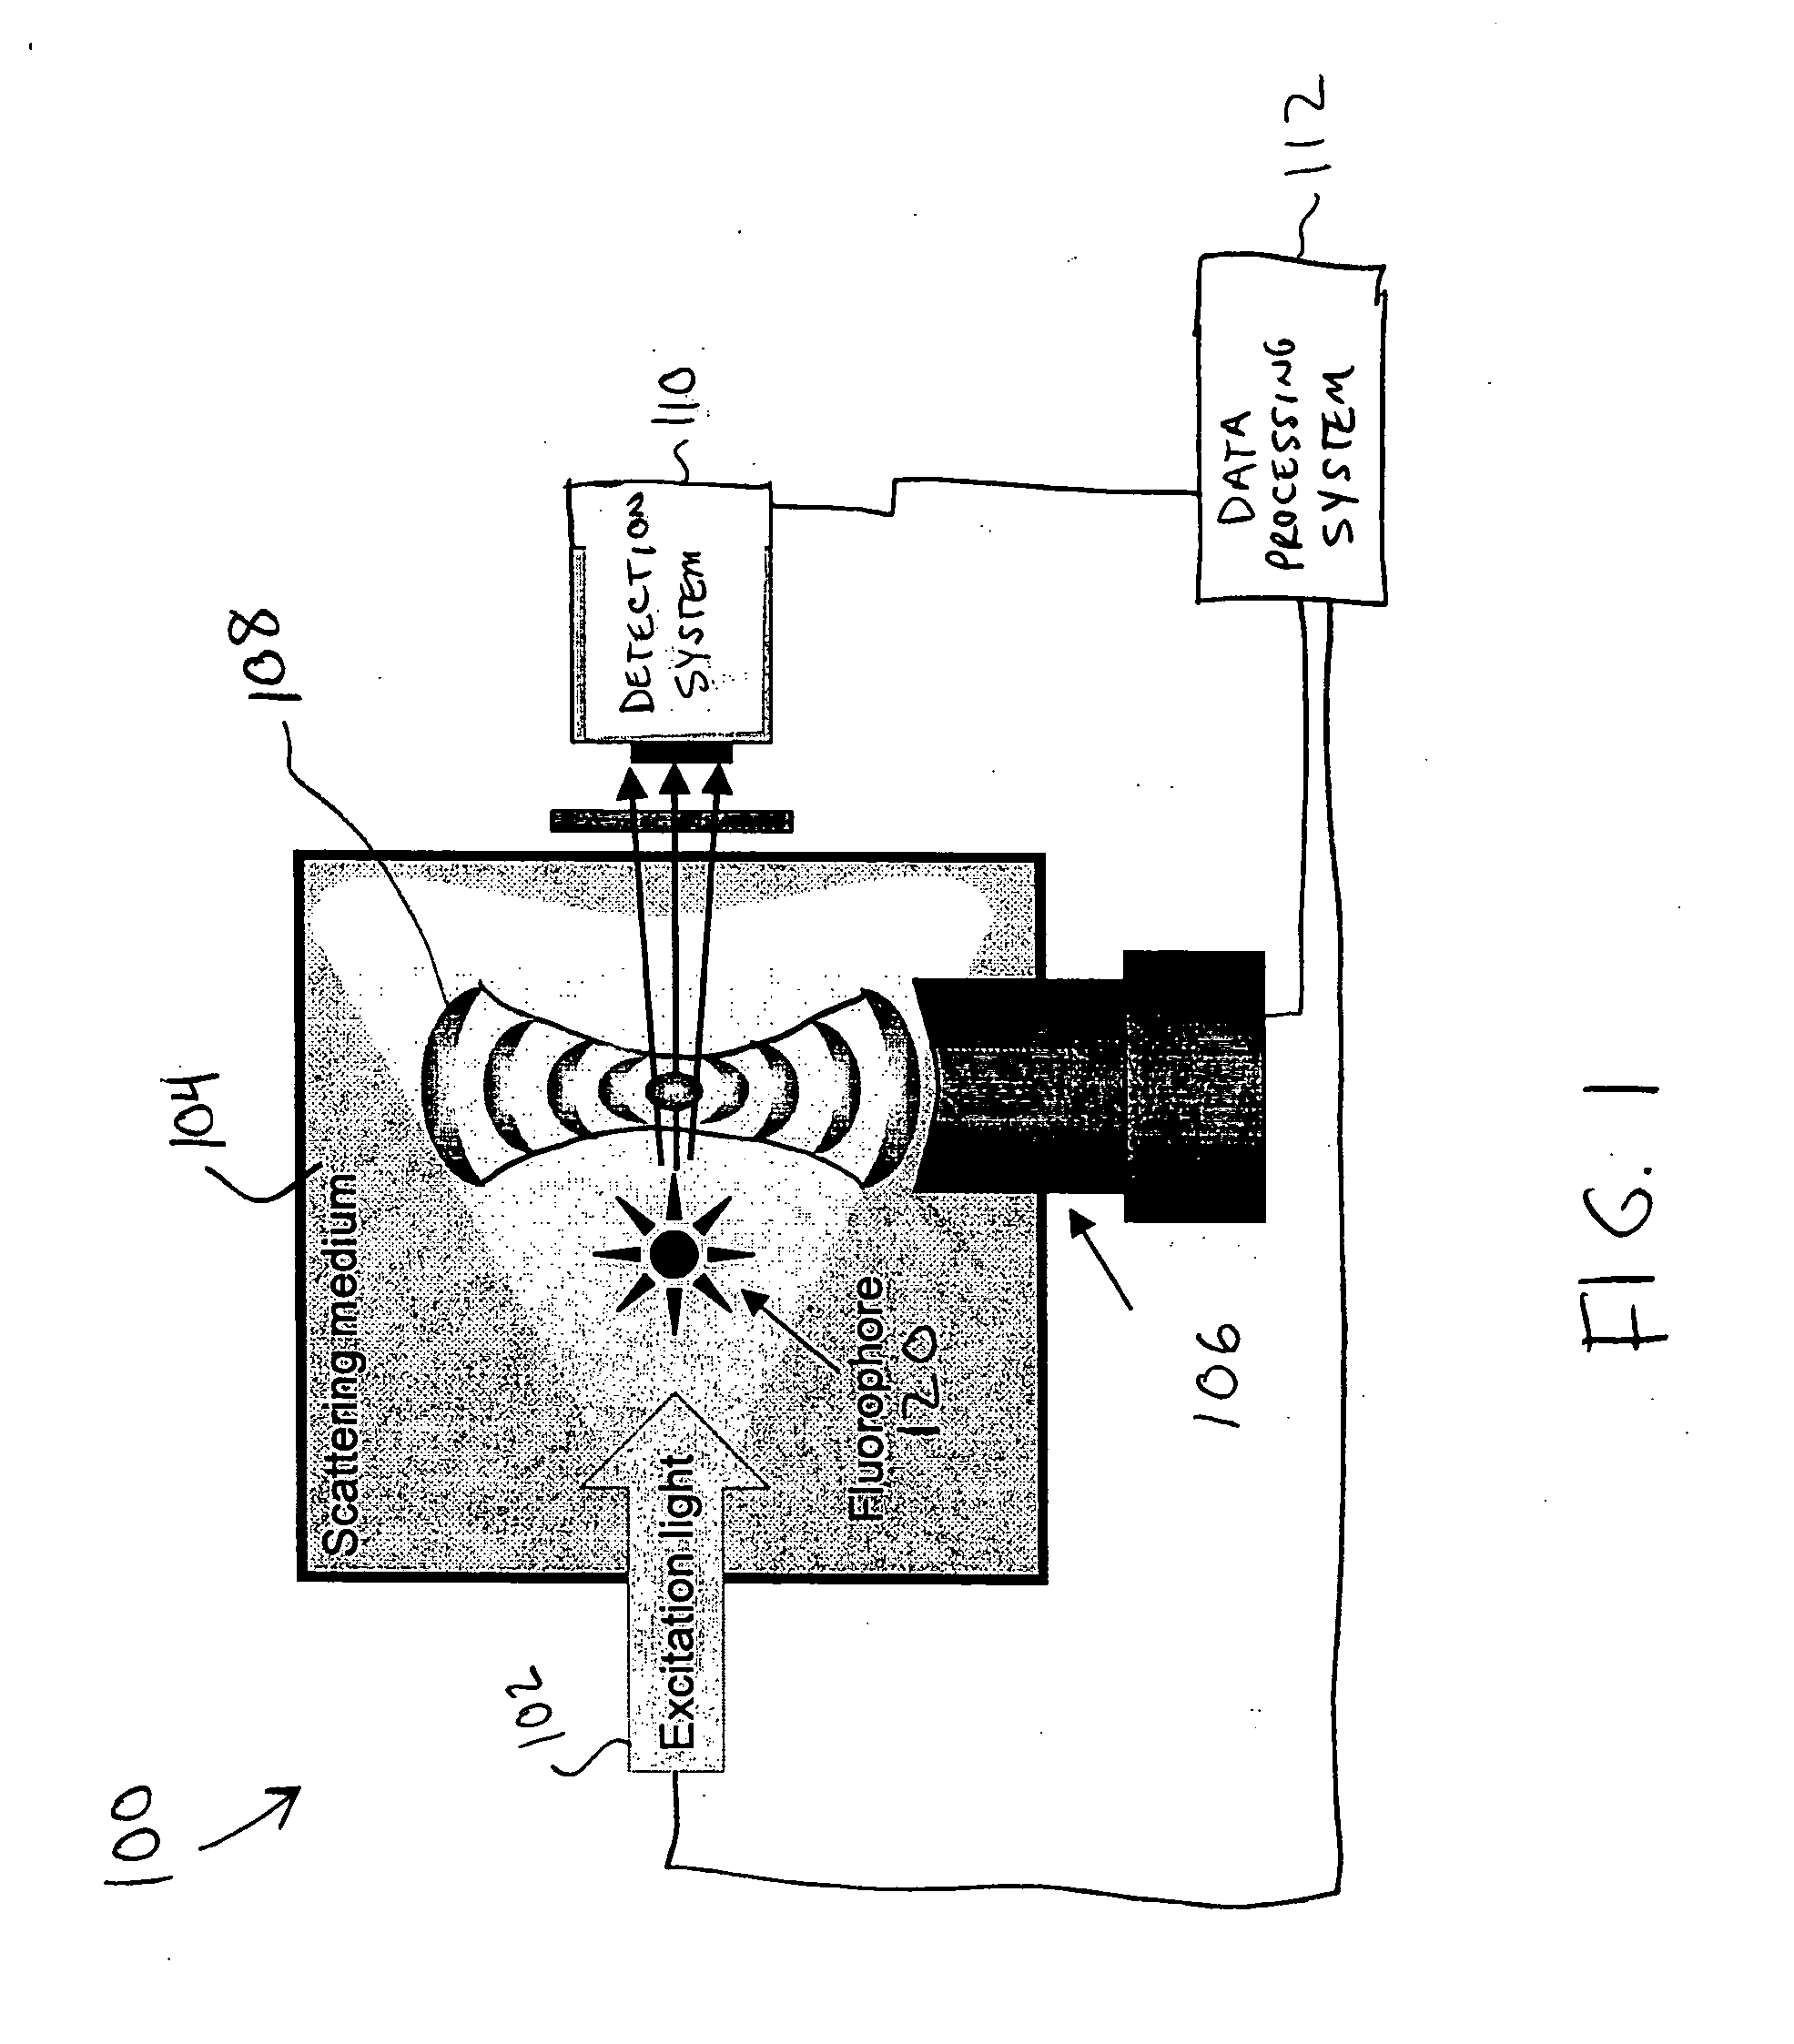 Method and system for ultrasonic tagging of fluorescence